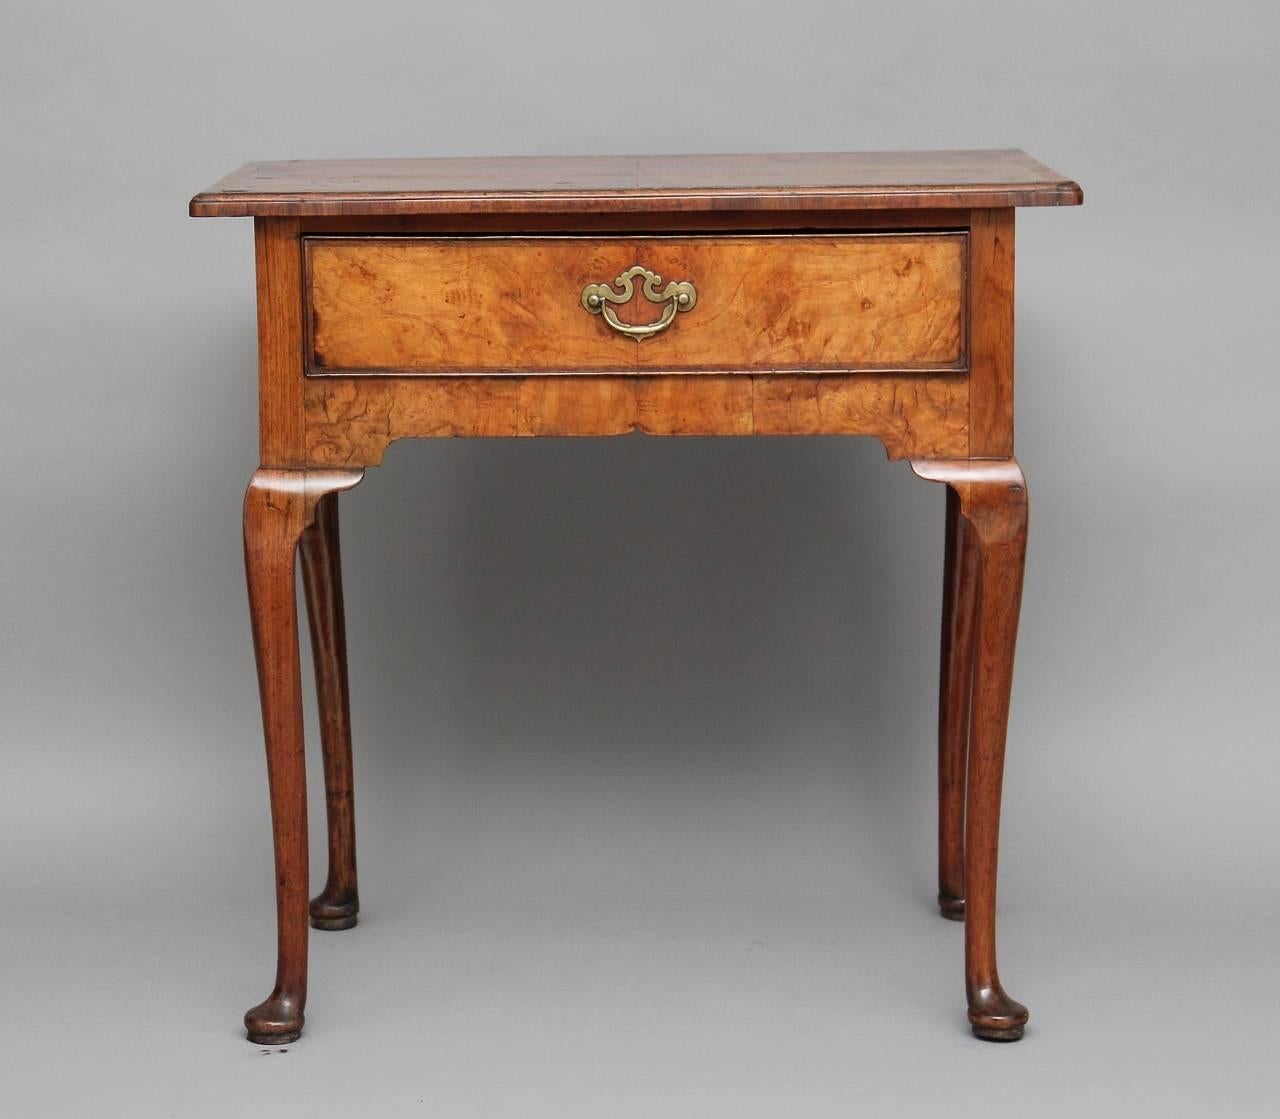 18th century elm lowboy with a quartered veneered moulded edge elm top with walnut crossbanding with a single oak lined drawer with original handle, standing on cabriole legs terminating with pad feet, circa 1760.

Measures: Height: 28